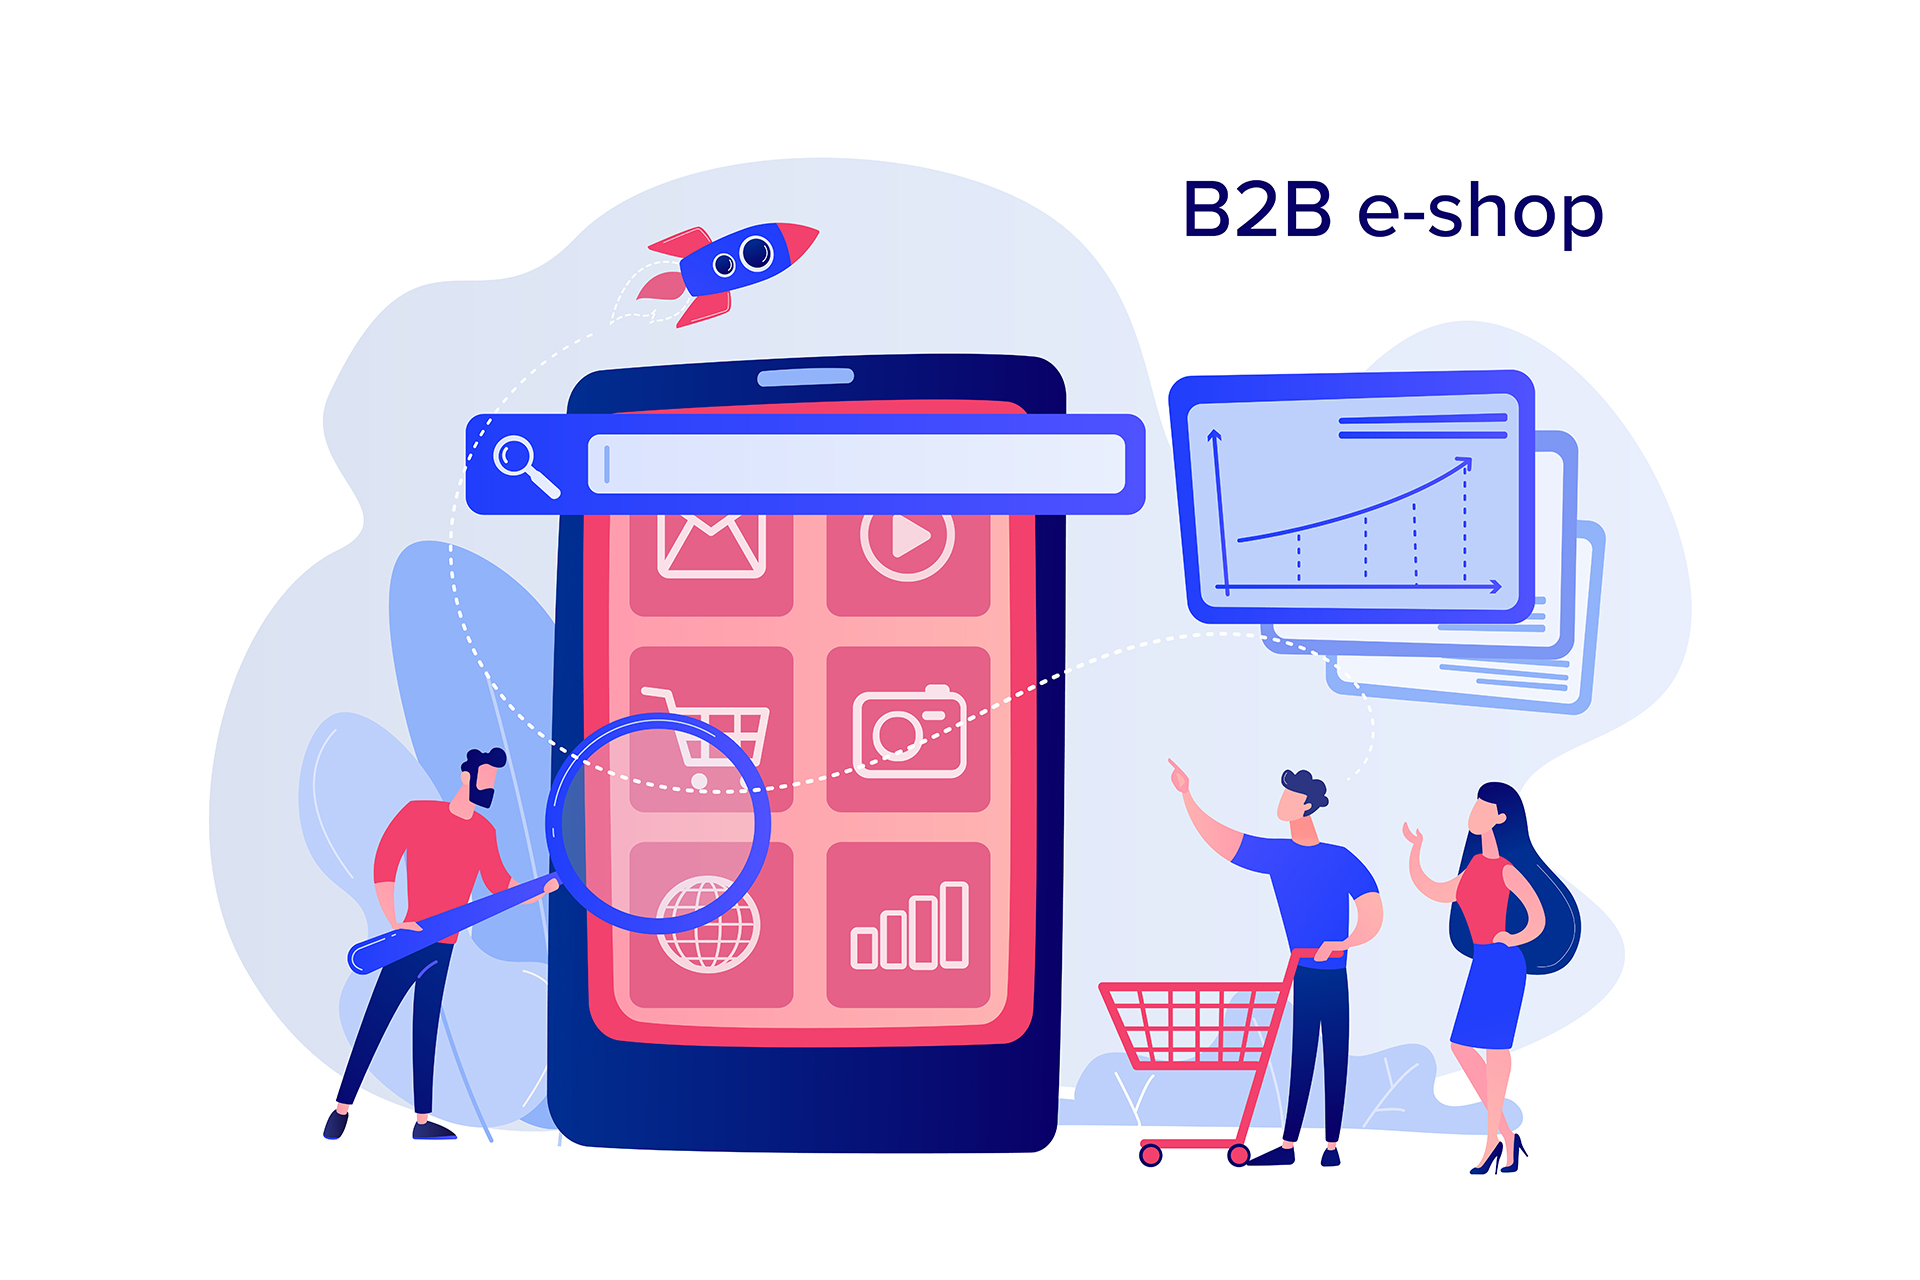 B2B eCommerce: another channel for your business